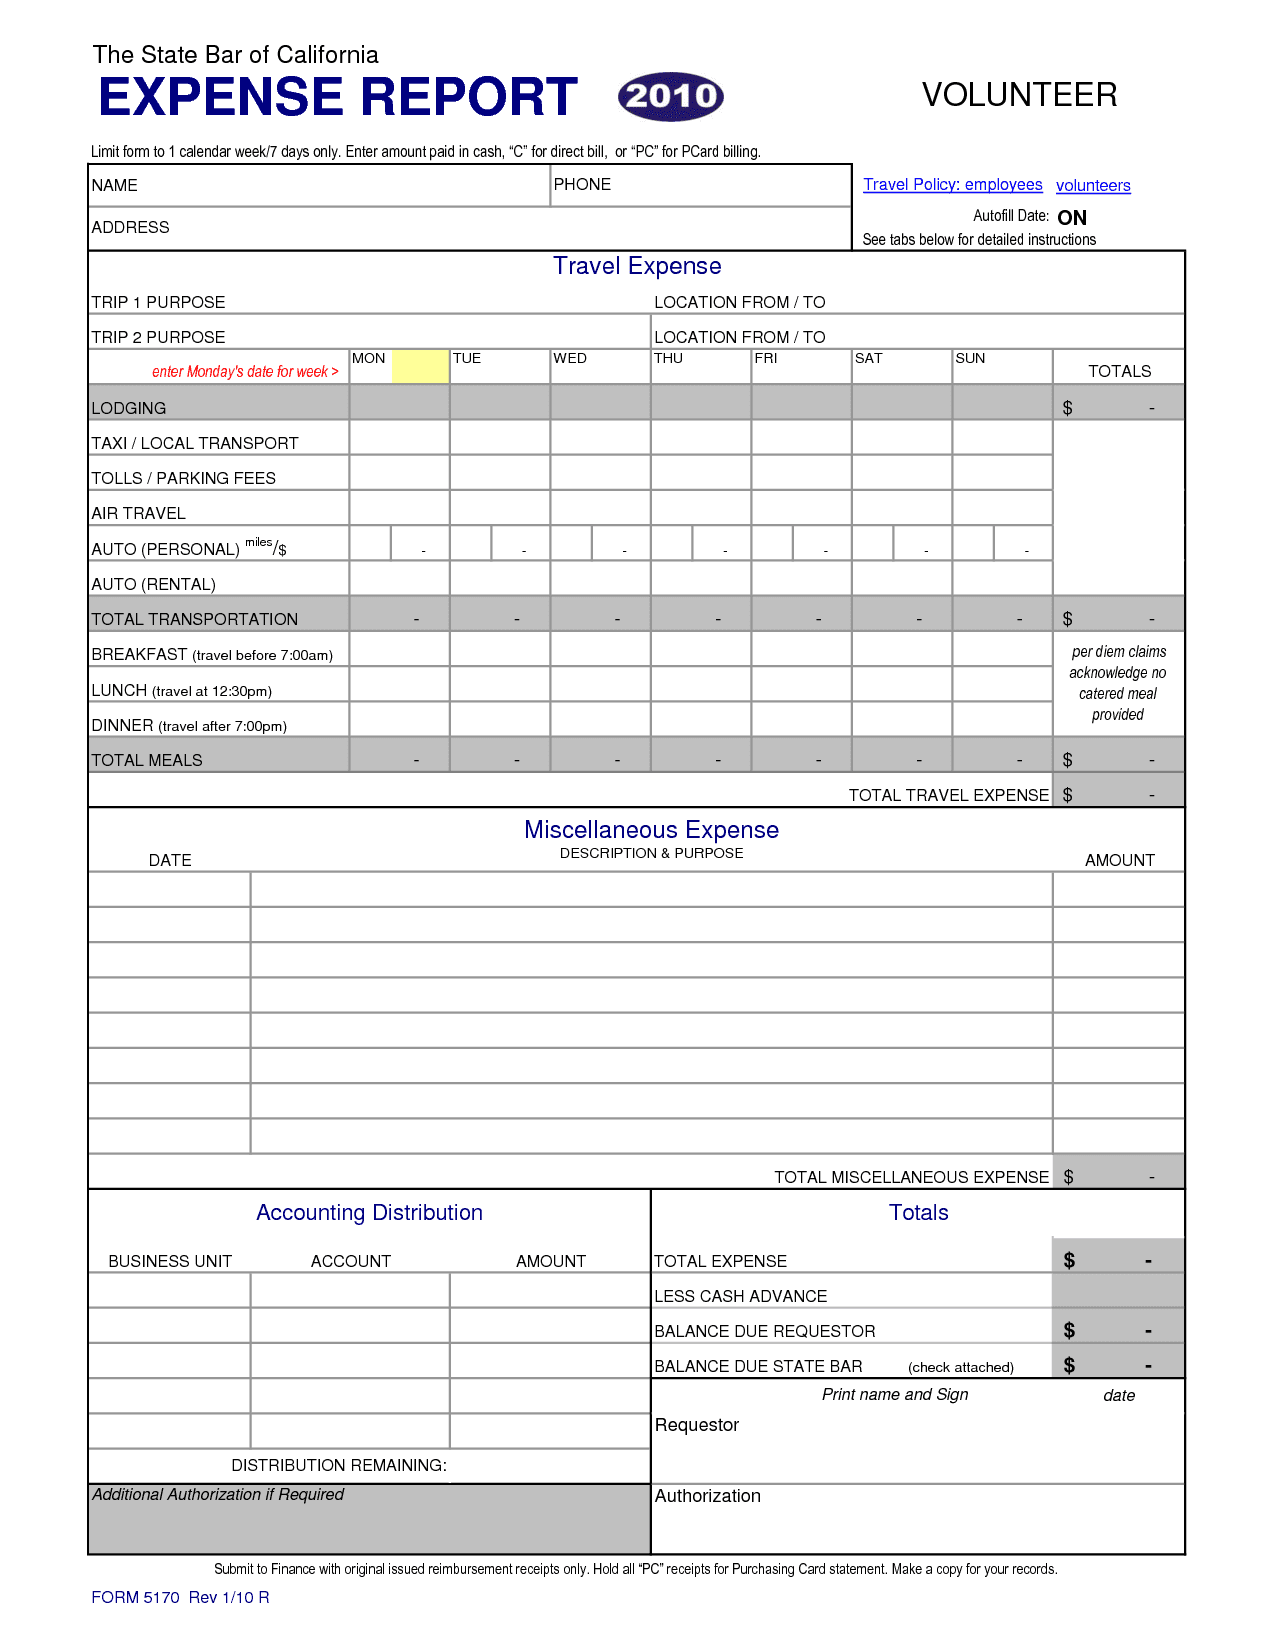 Expense Report Template Excel 2010 And Travel And Business Expense Report